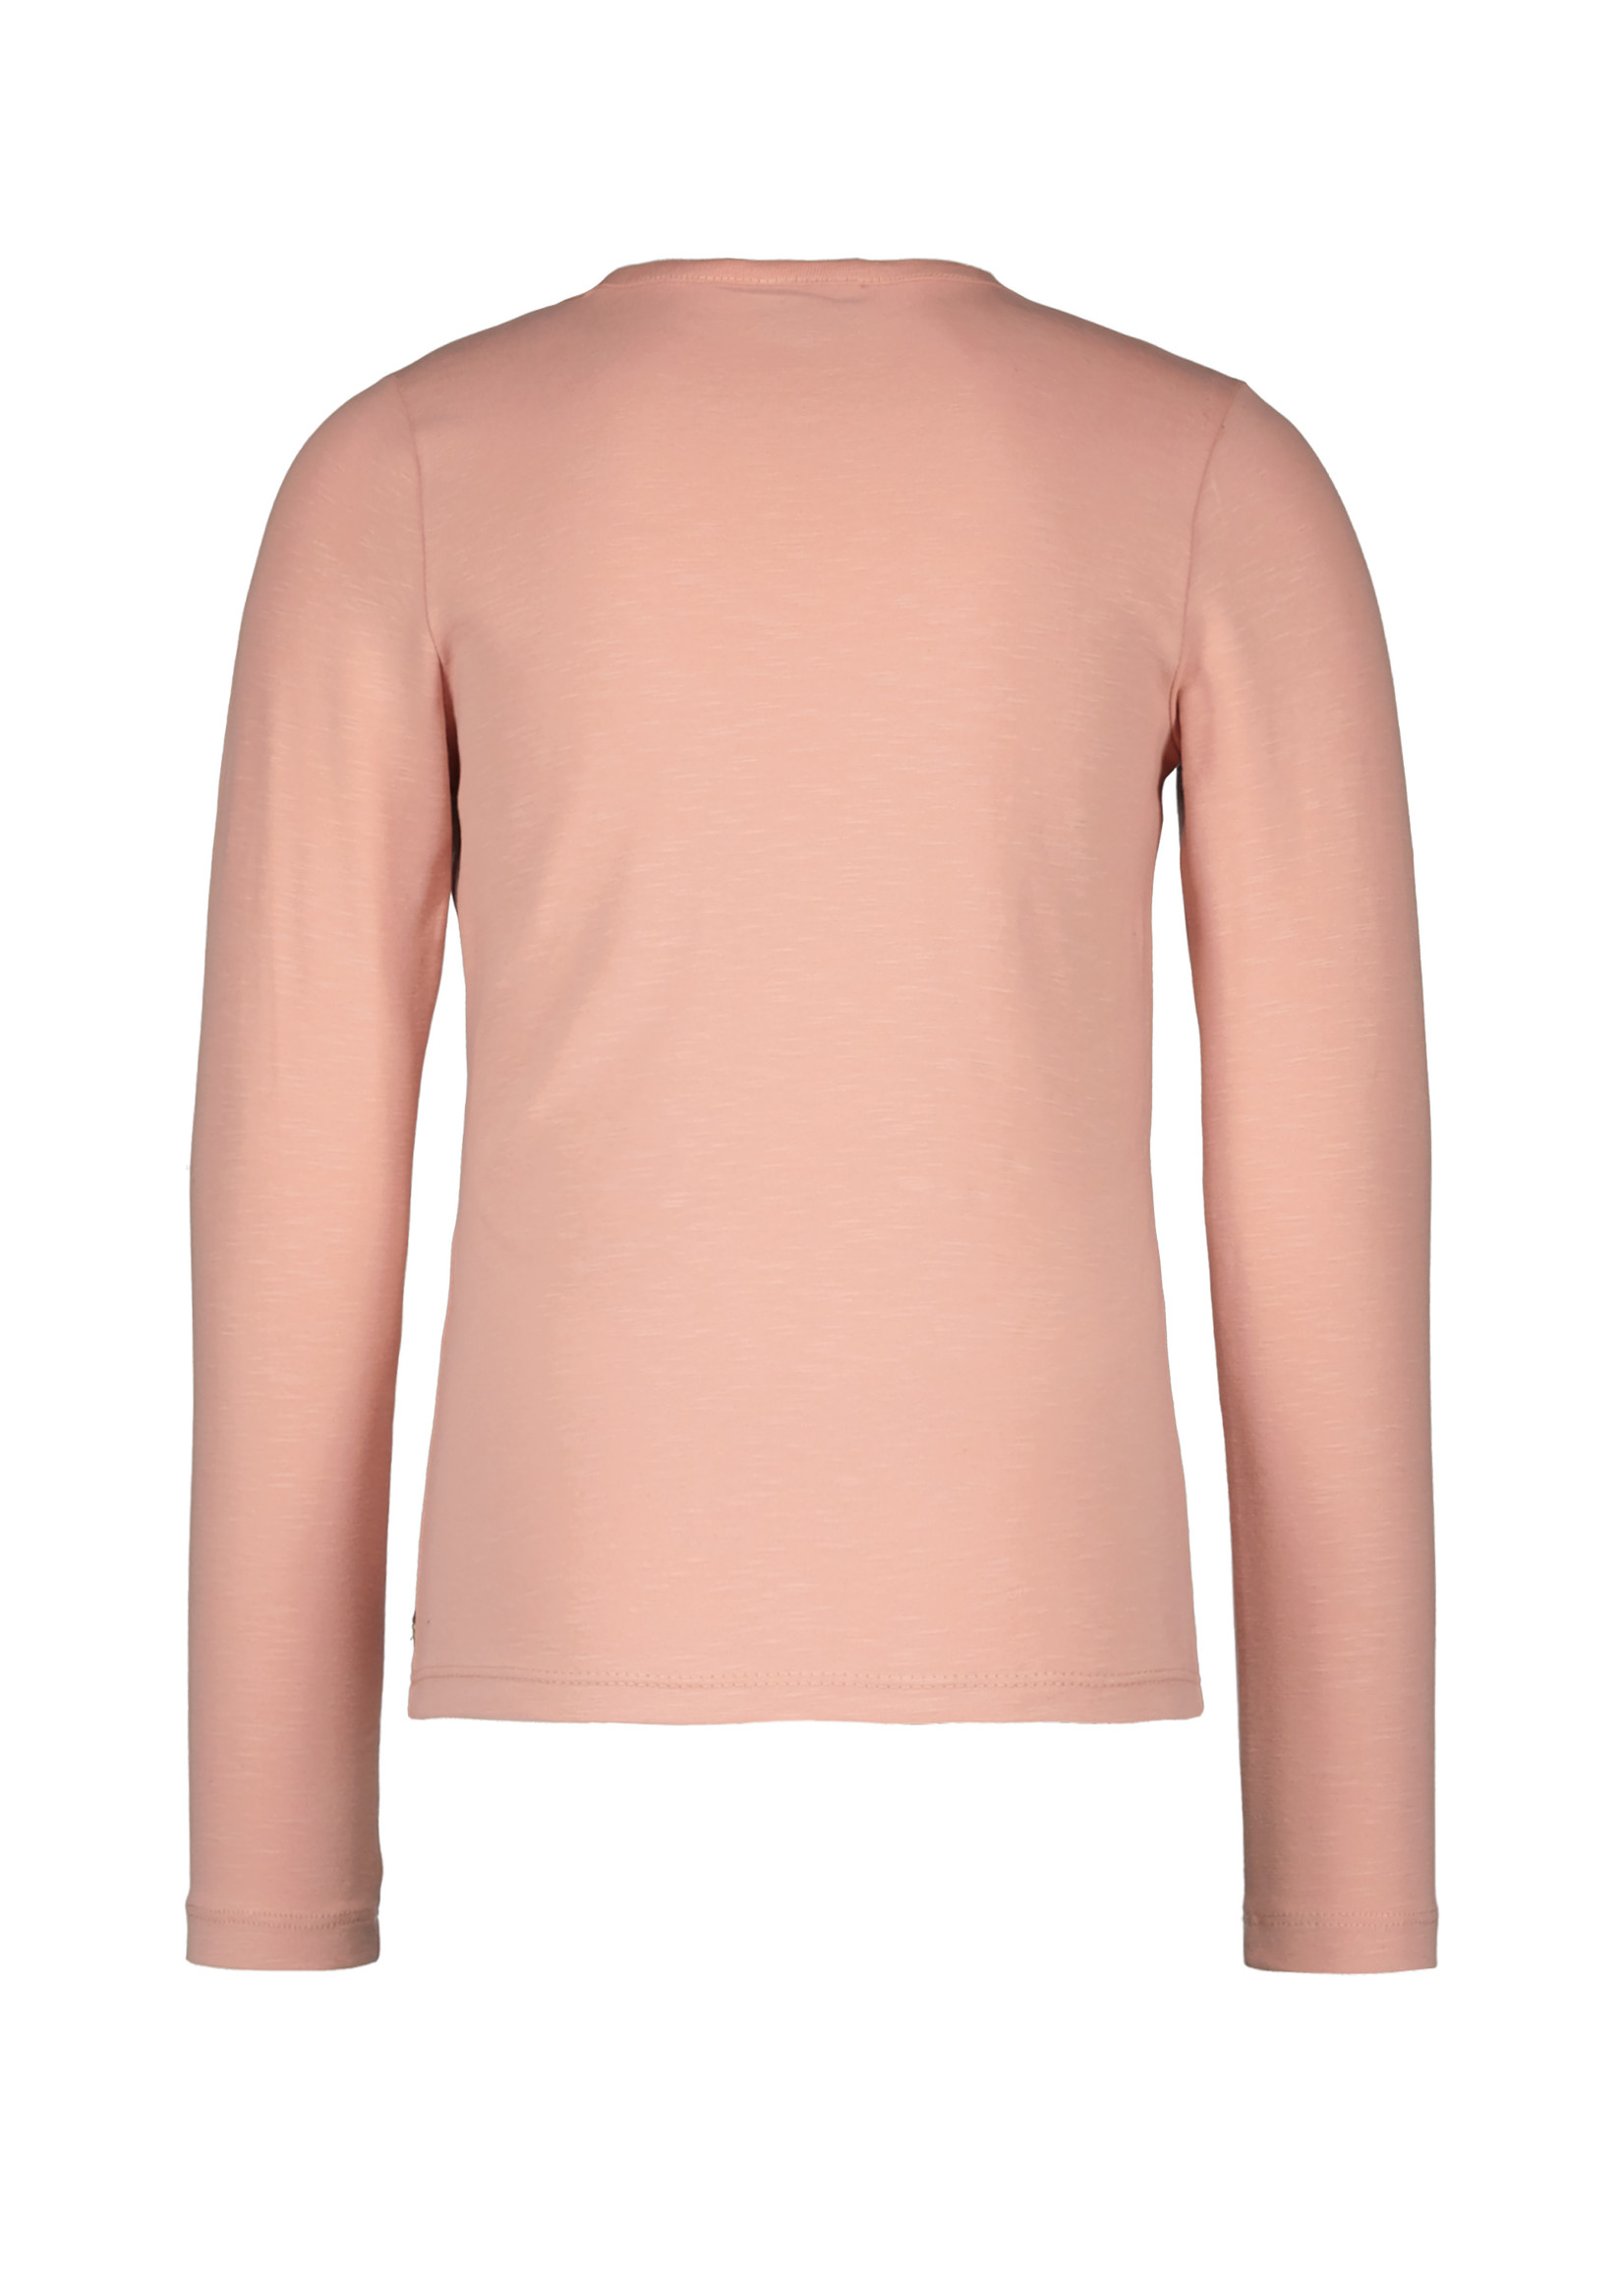 Faded pink jersey tee